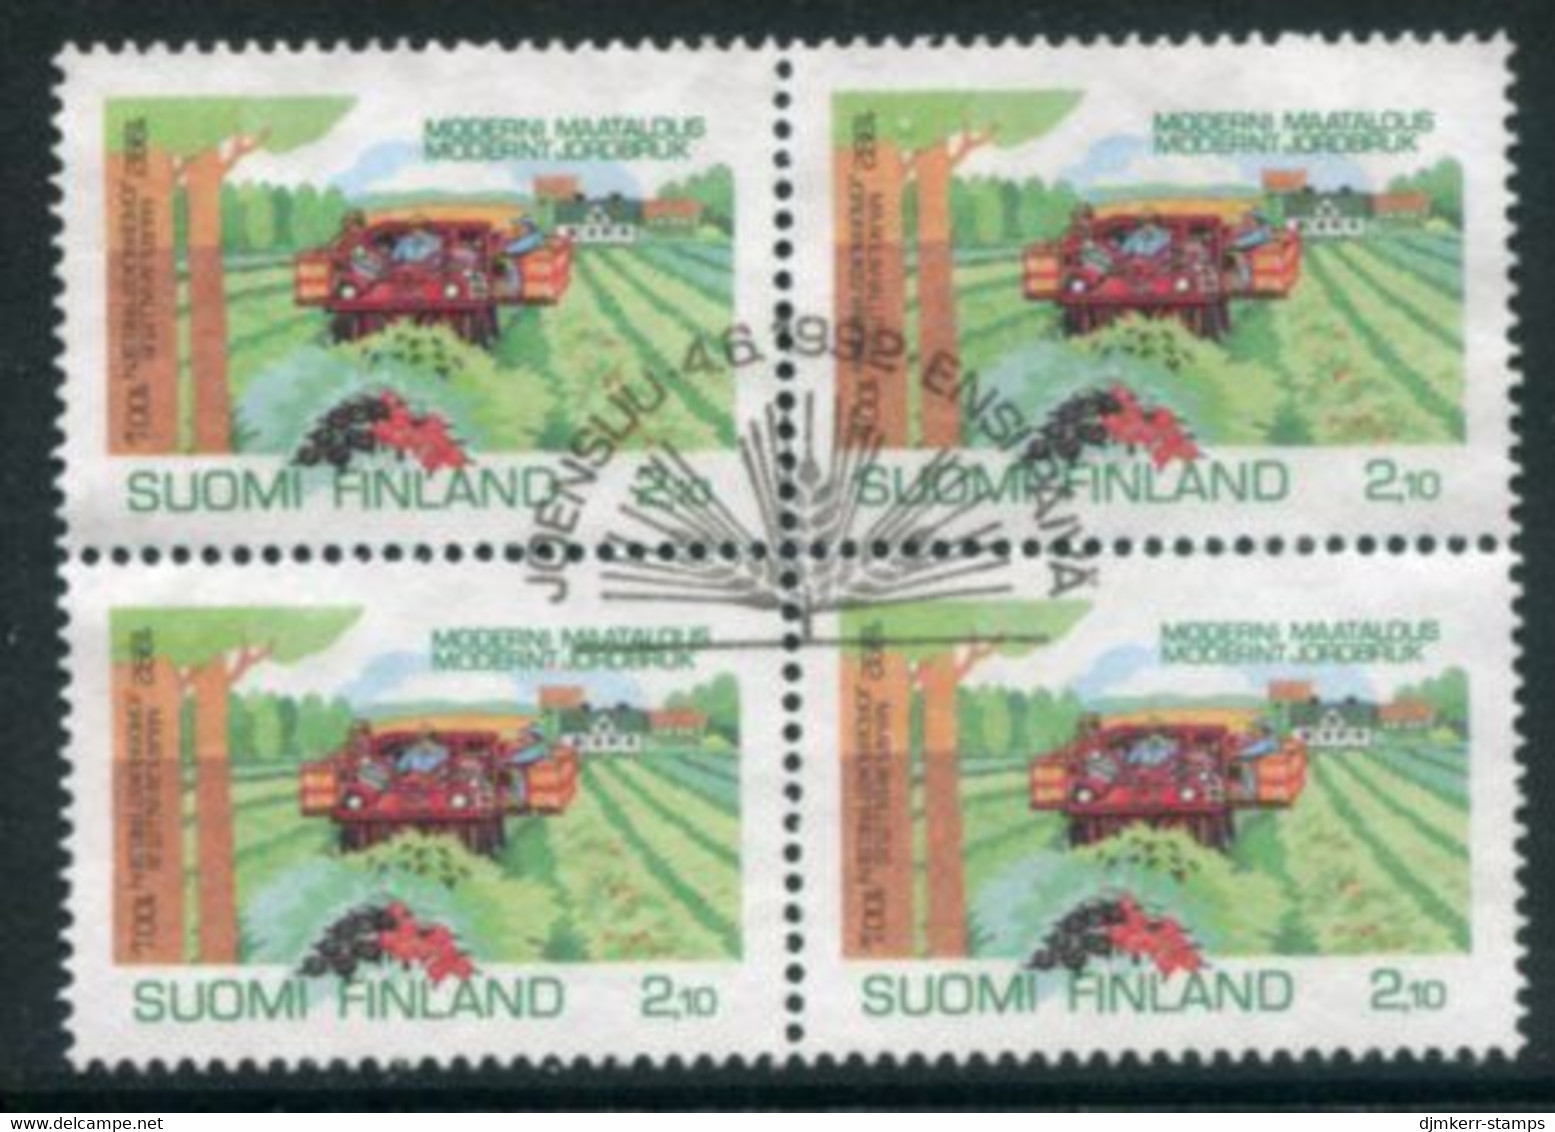 FINLAND 1992 Centenary Of Agriculture Ministry Block Of 4 Used.  Michel 1180 - Oblitérés